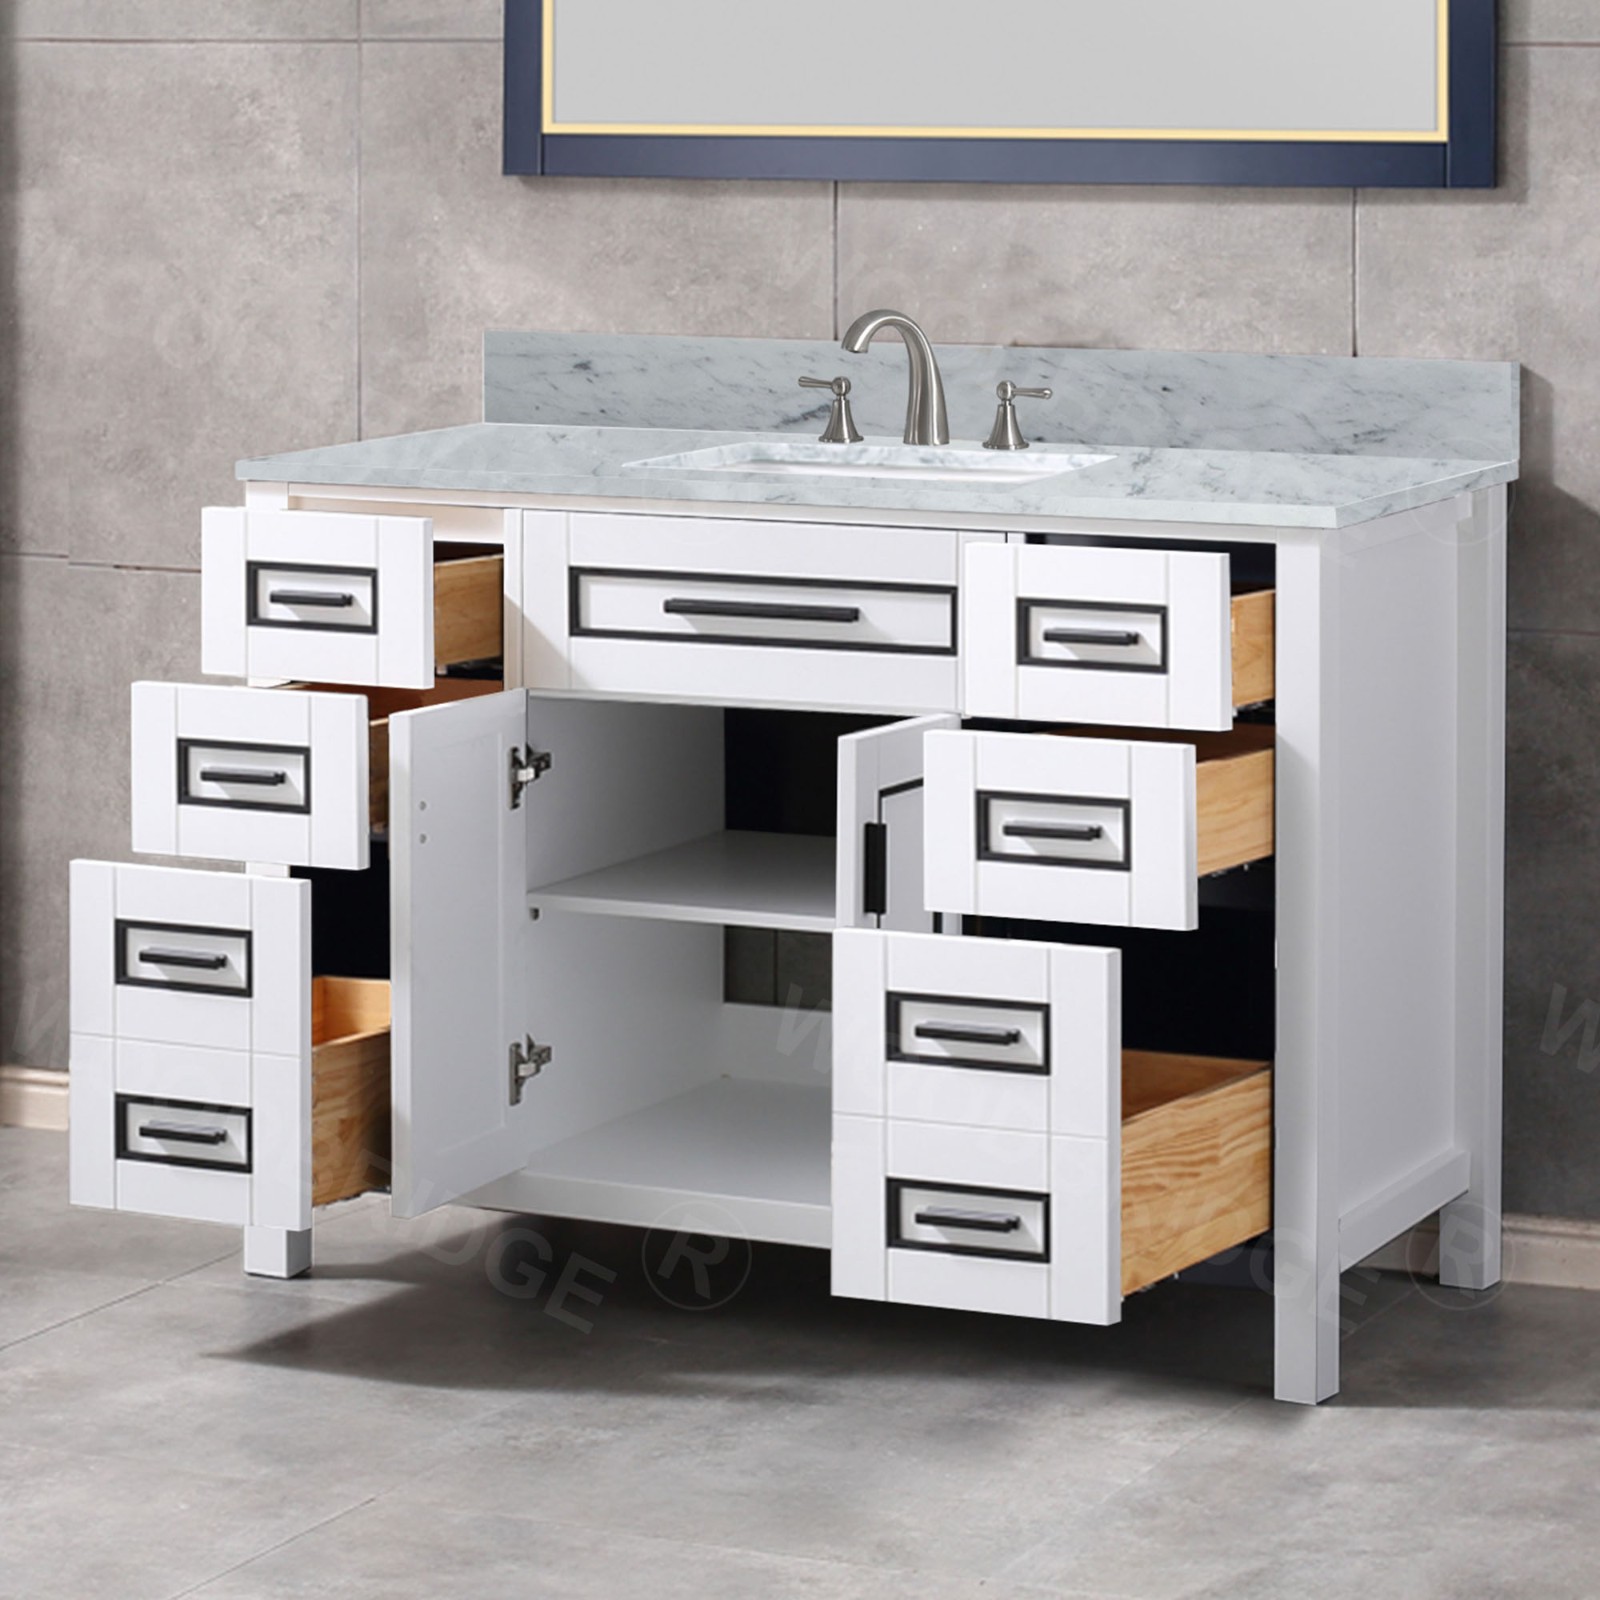  WOODBRIDGE Milan  49” Floor Mounted Single Basin Vanity Set with Solid Wood Cabinet in White, and Carrara White Marble Vanity Top with Pre-installed Undermount Rectangle Bathroom Sink in White, Pre-Drilled 3-Hole for 4-inch Centerset Faucet_4698